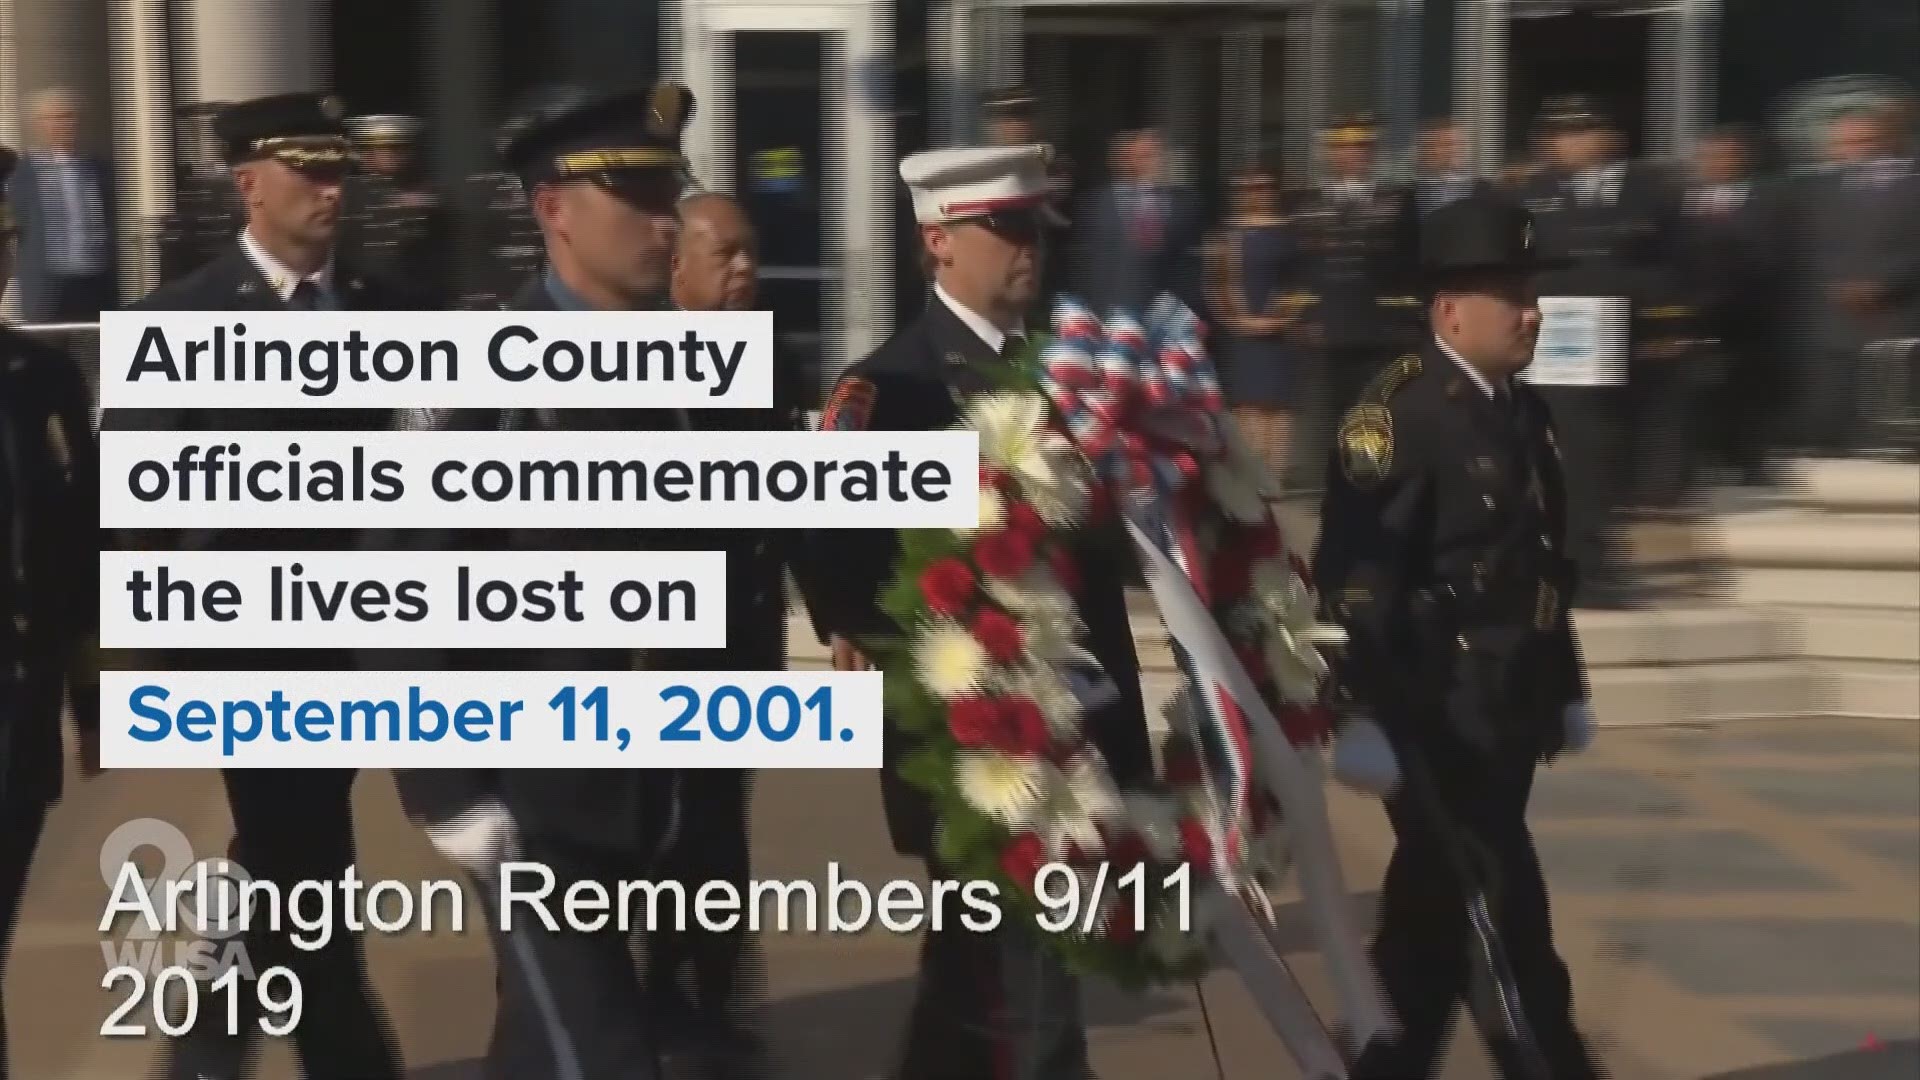 Arlington County officials commemorate the lives lost on 9/11.